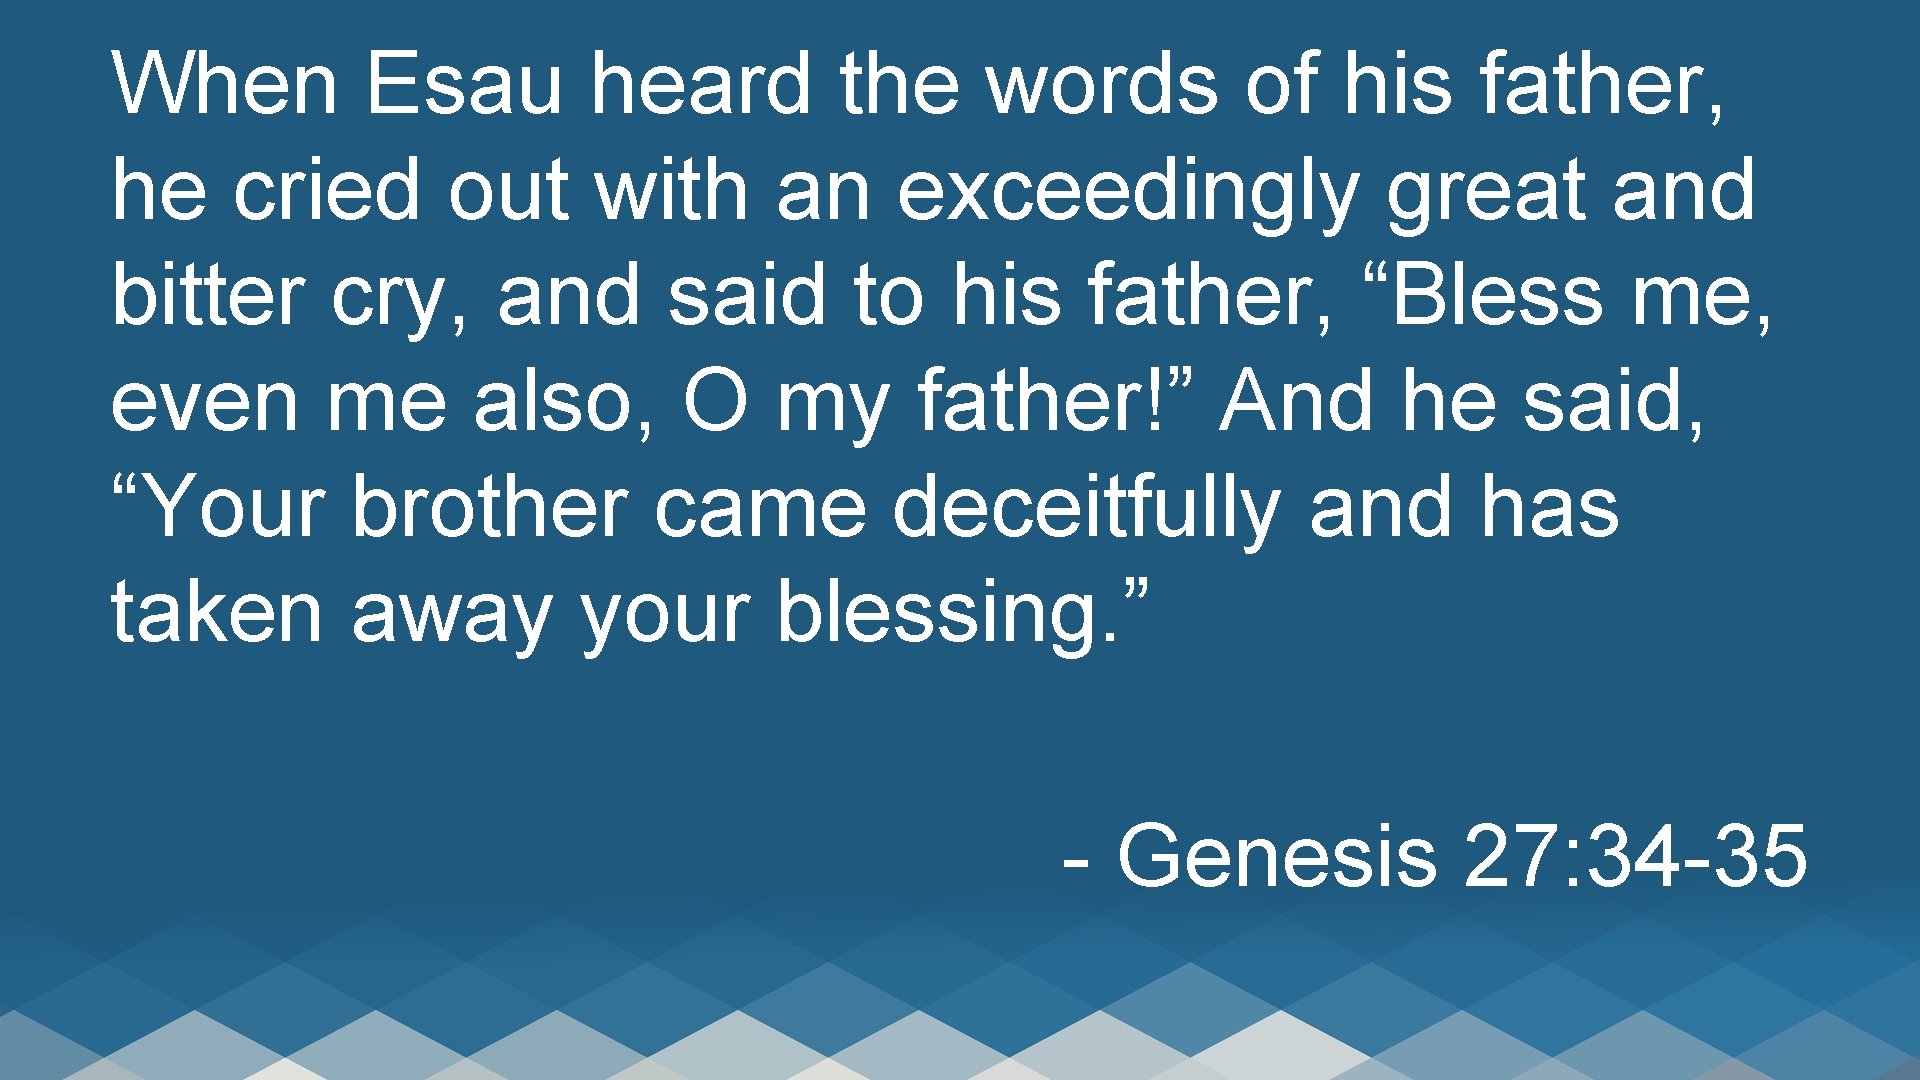 When Esau heard the words of his father, he cried out with an exceedingly